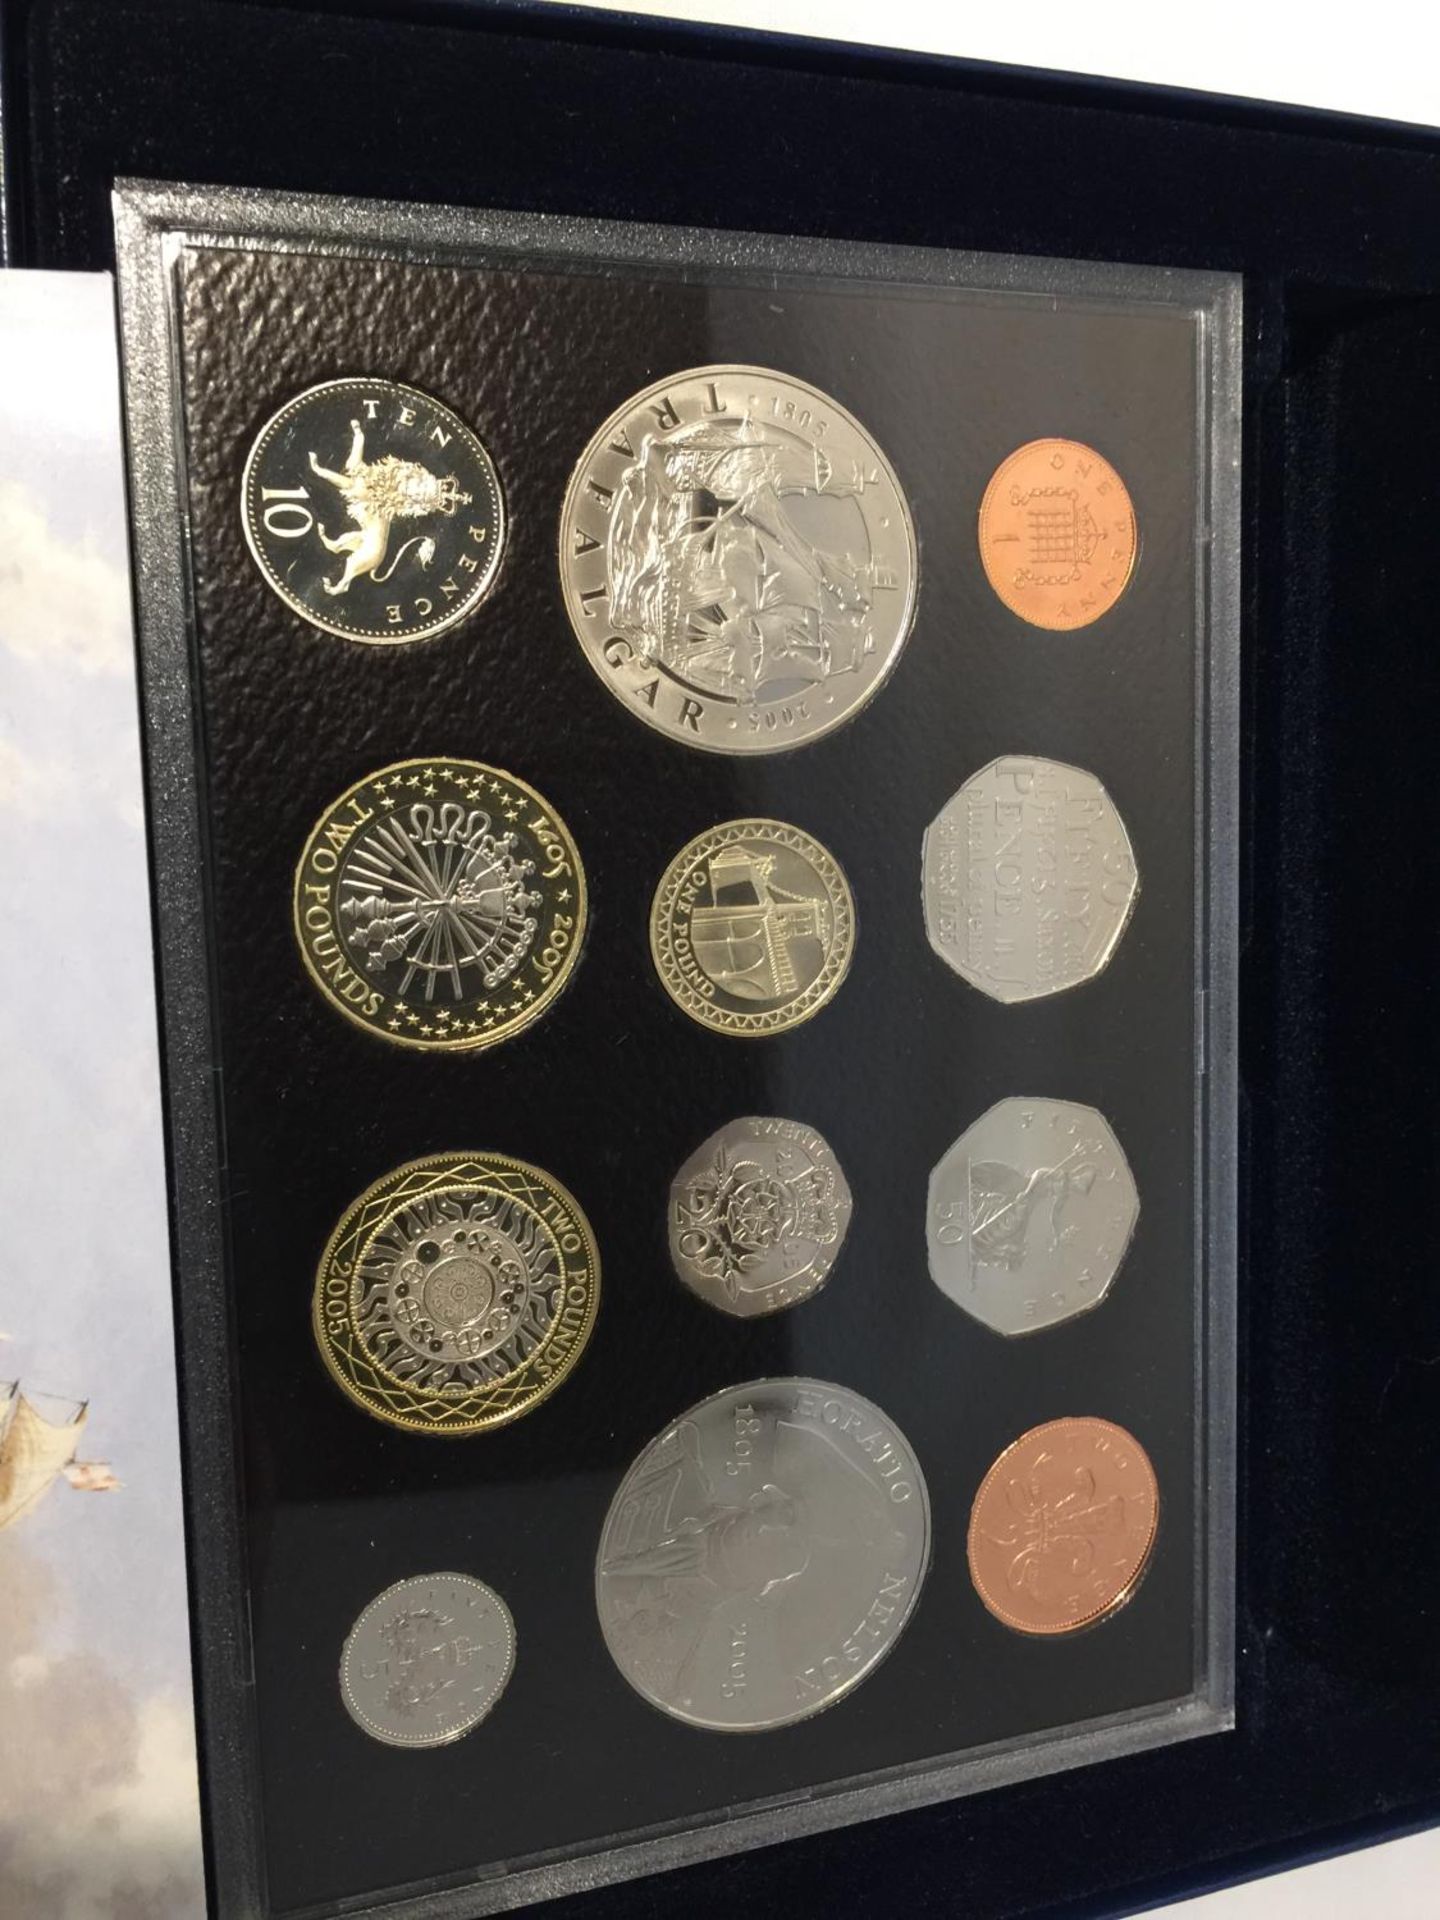 A UNITED KINGDOM ROYAL MINT 2005 COIN SET, WITH COA - Image 2 of 4